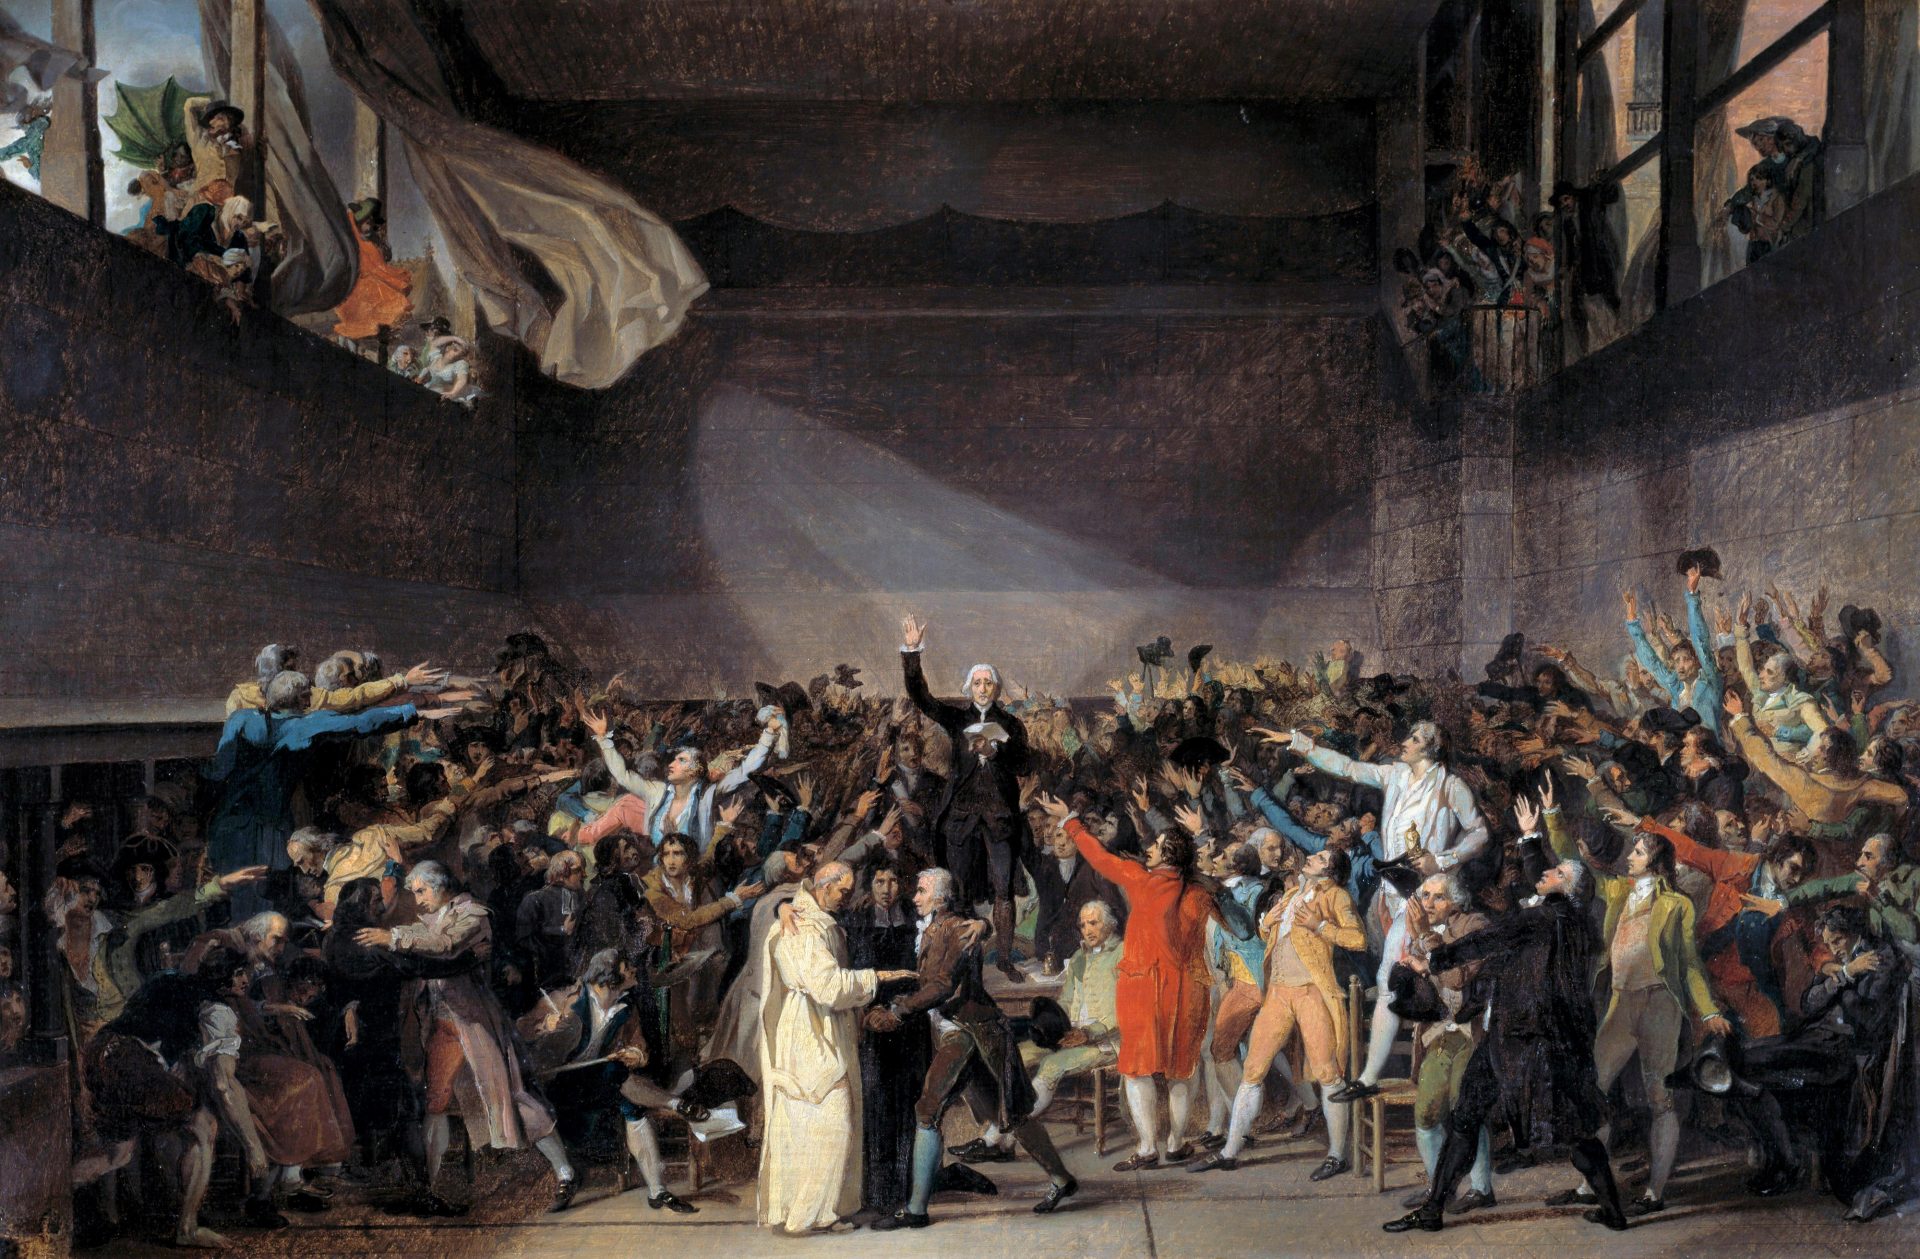 Jean Sylvain Bailly at
the centre of Jacques Louis David’s The Tennis Court Oath. Photo: Josse/Leemage